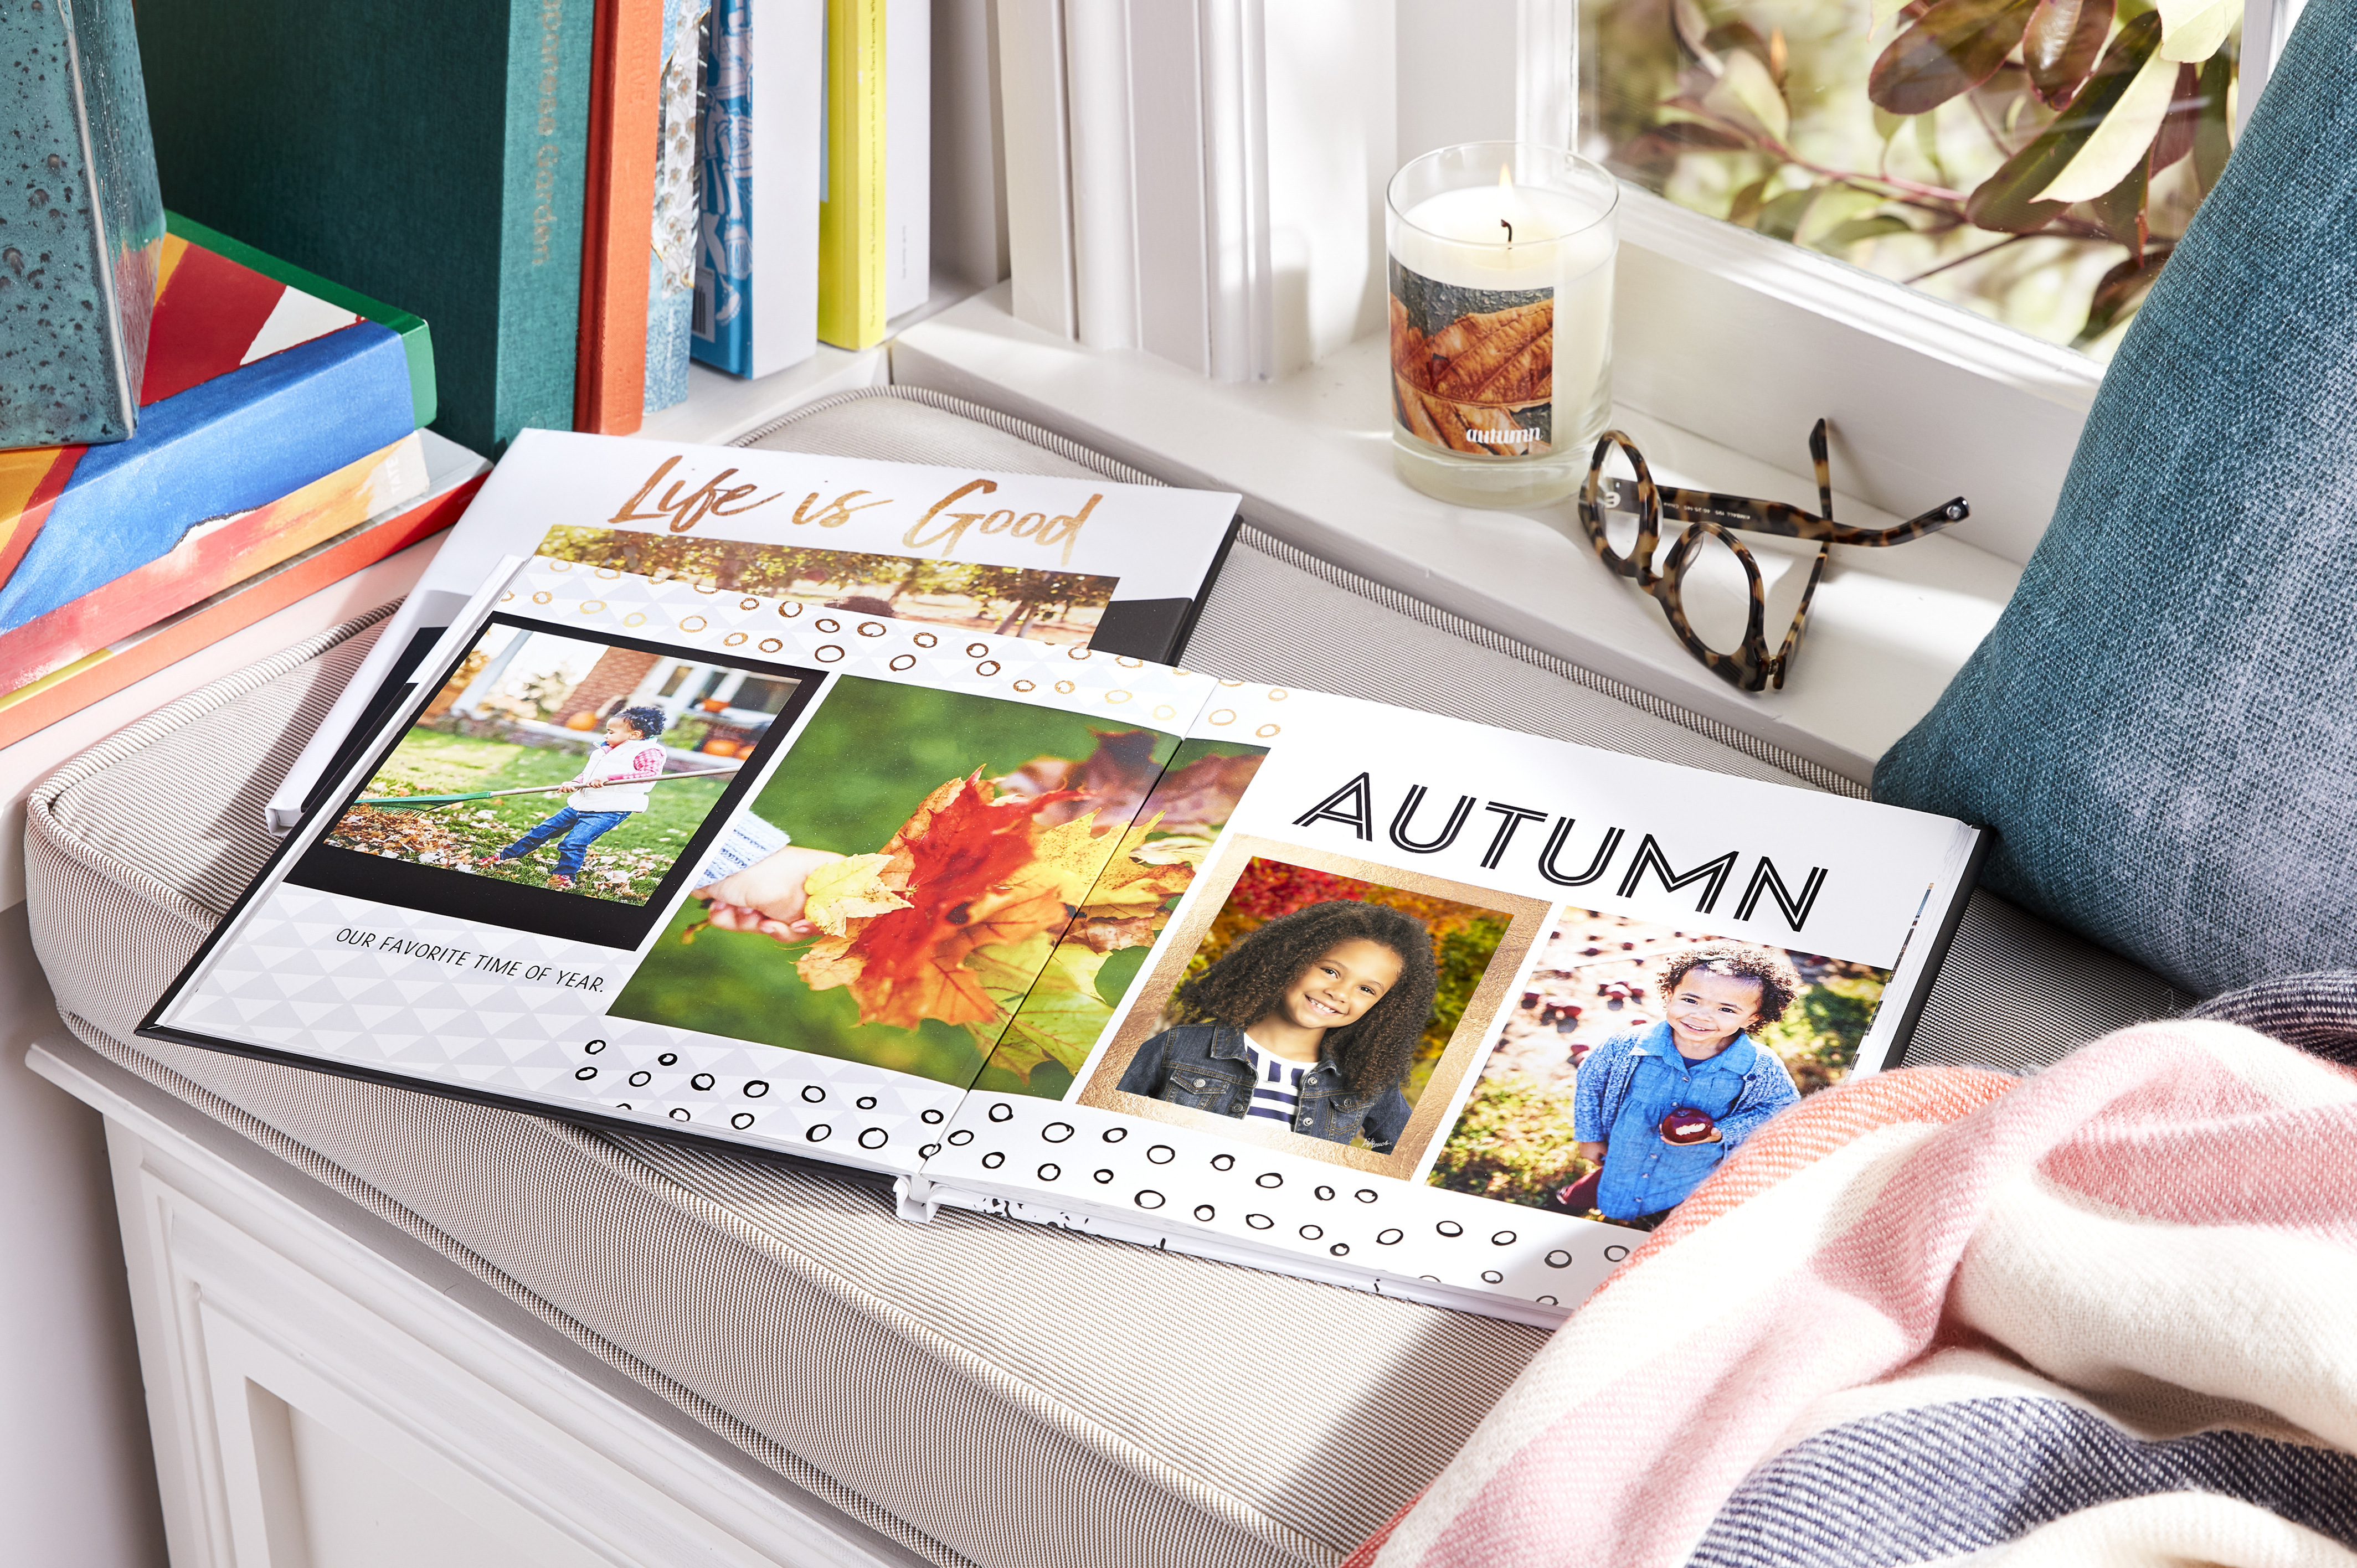 Lifetstyle image of a desk featuring school picture day images in a photo book.